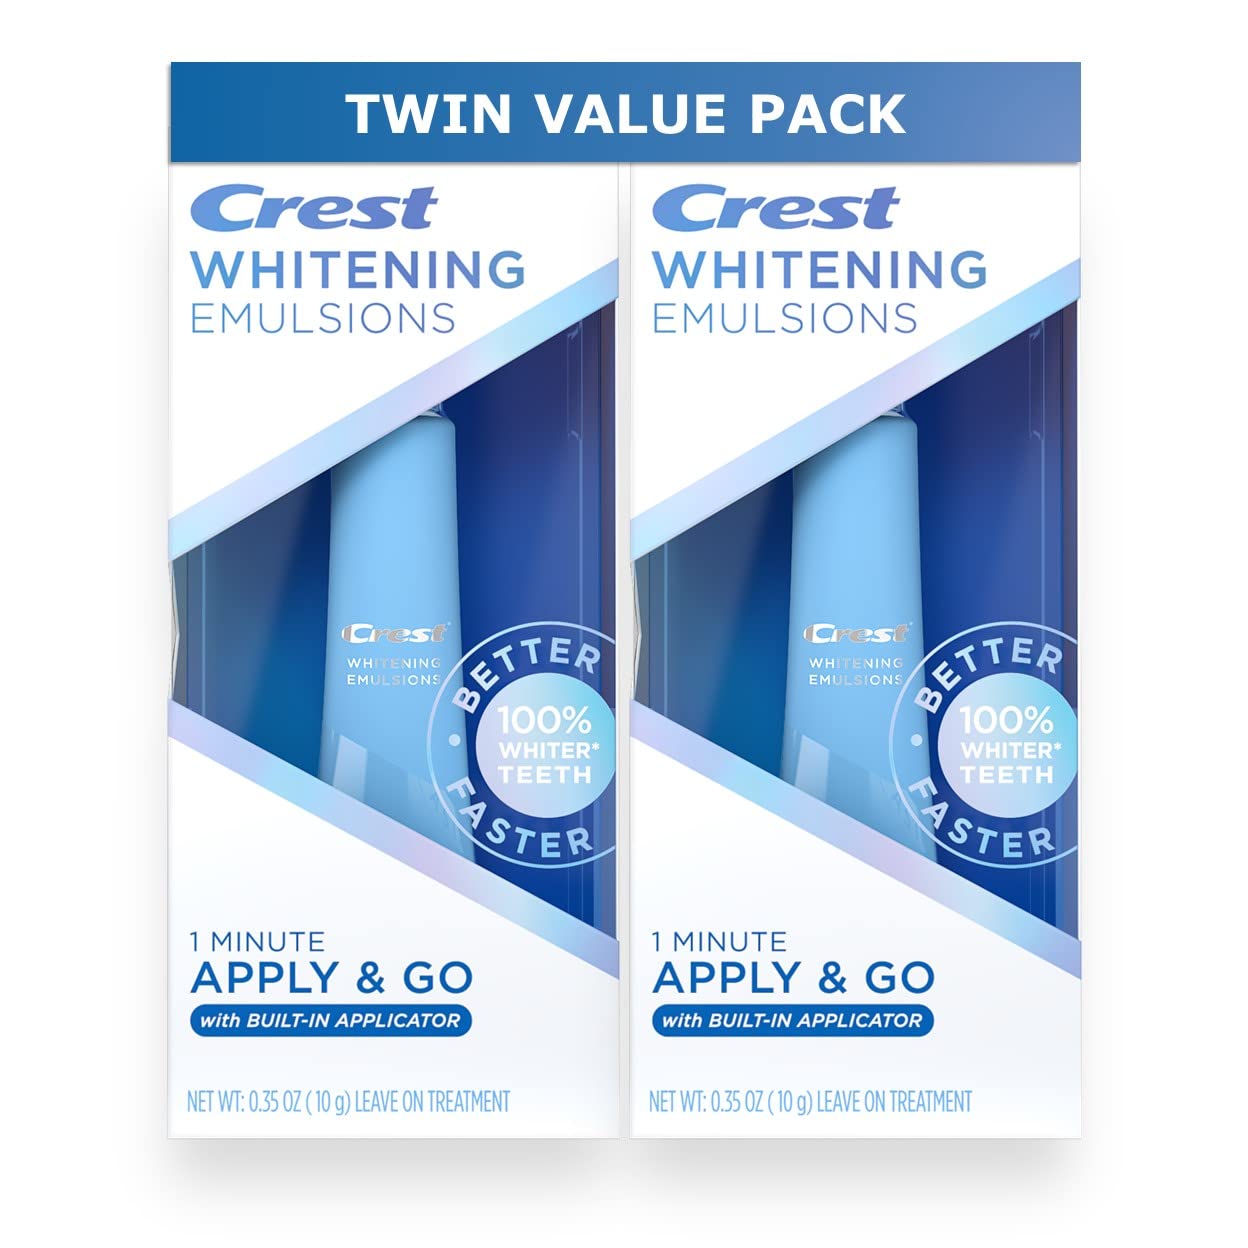 Crest Whitening Emulsions On-the-Go Leave-on Teeth Whitening Gel Kit with Built-in Applicator, 0.35 oz (10g), Twin Value Pack